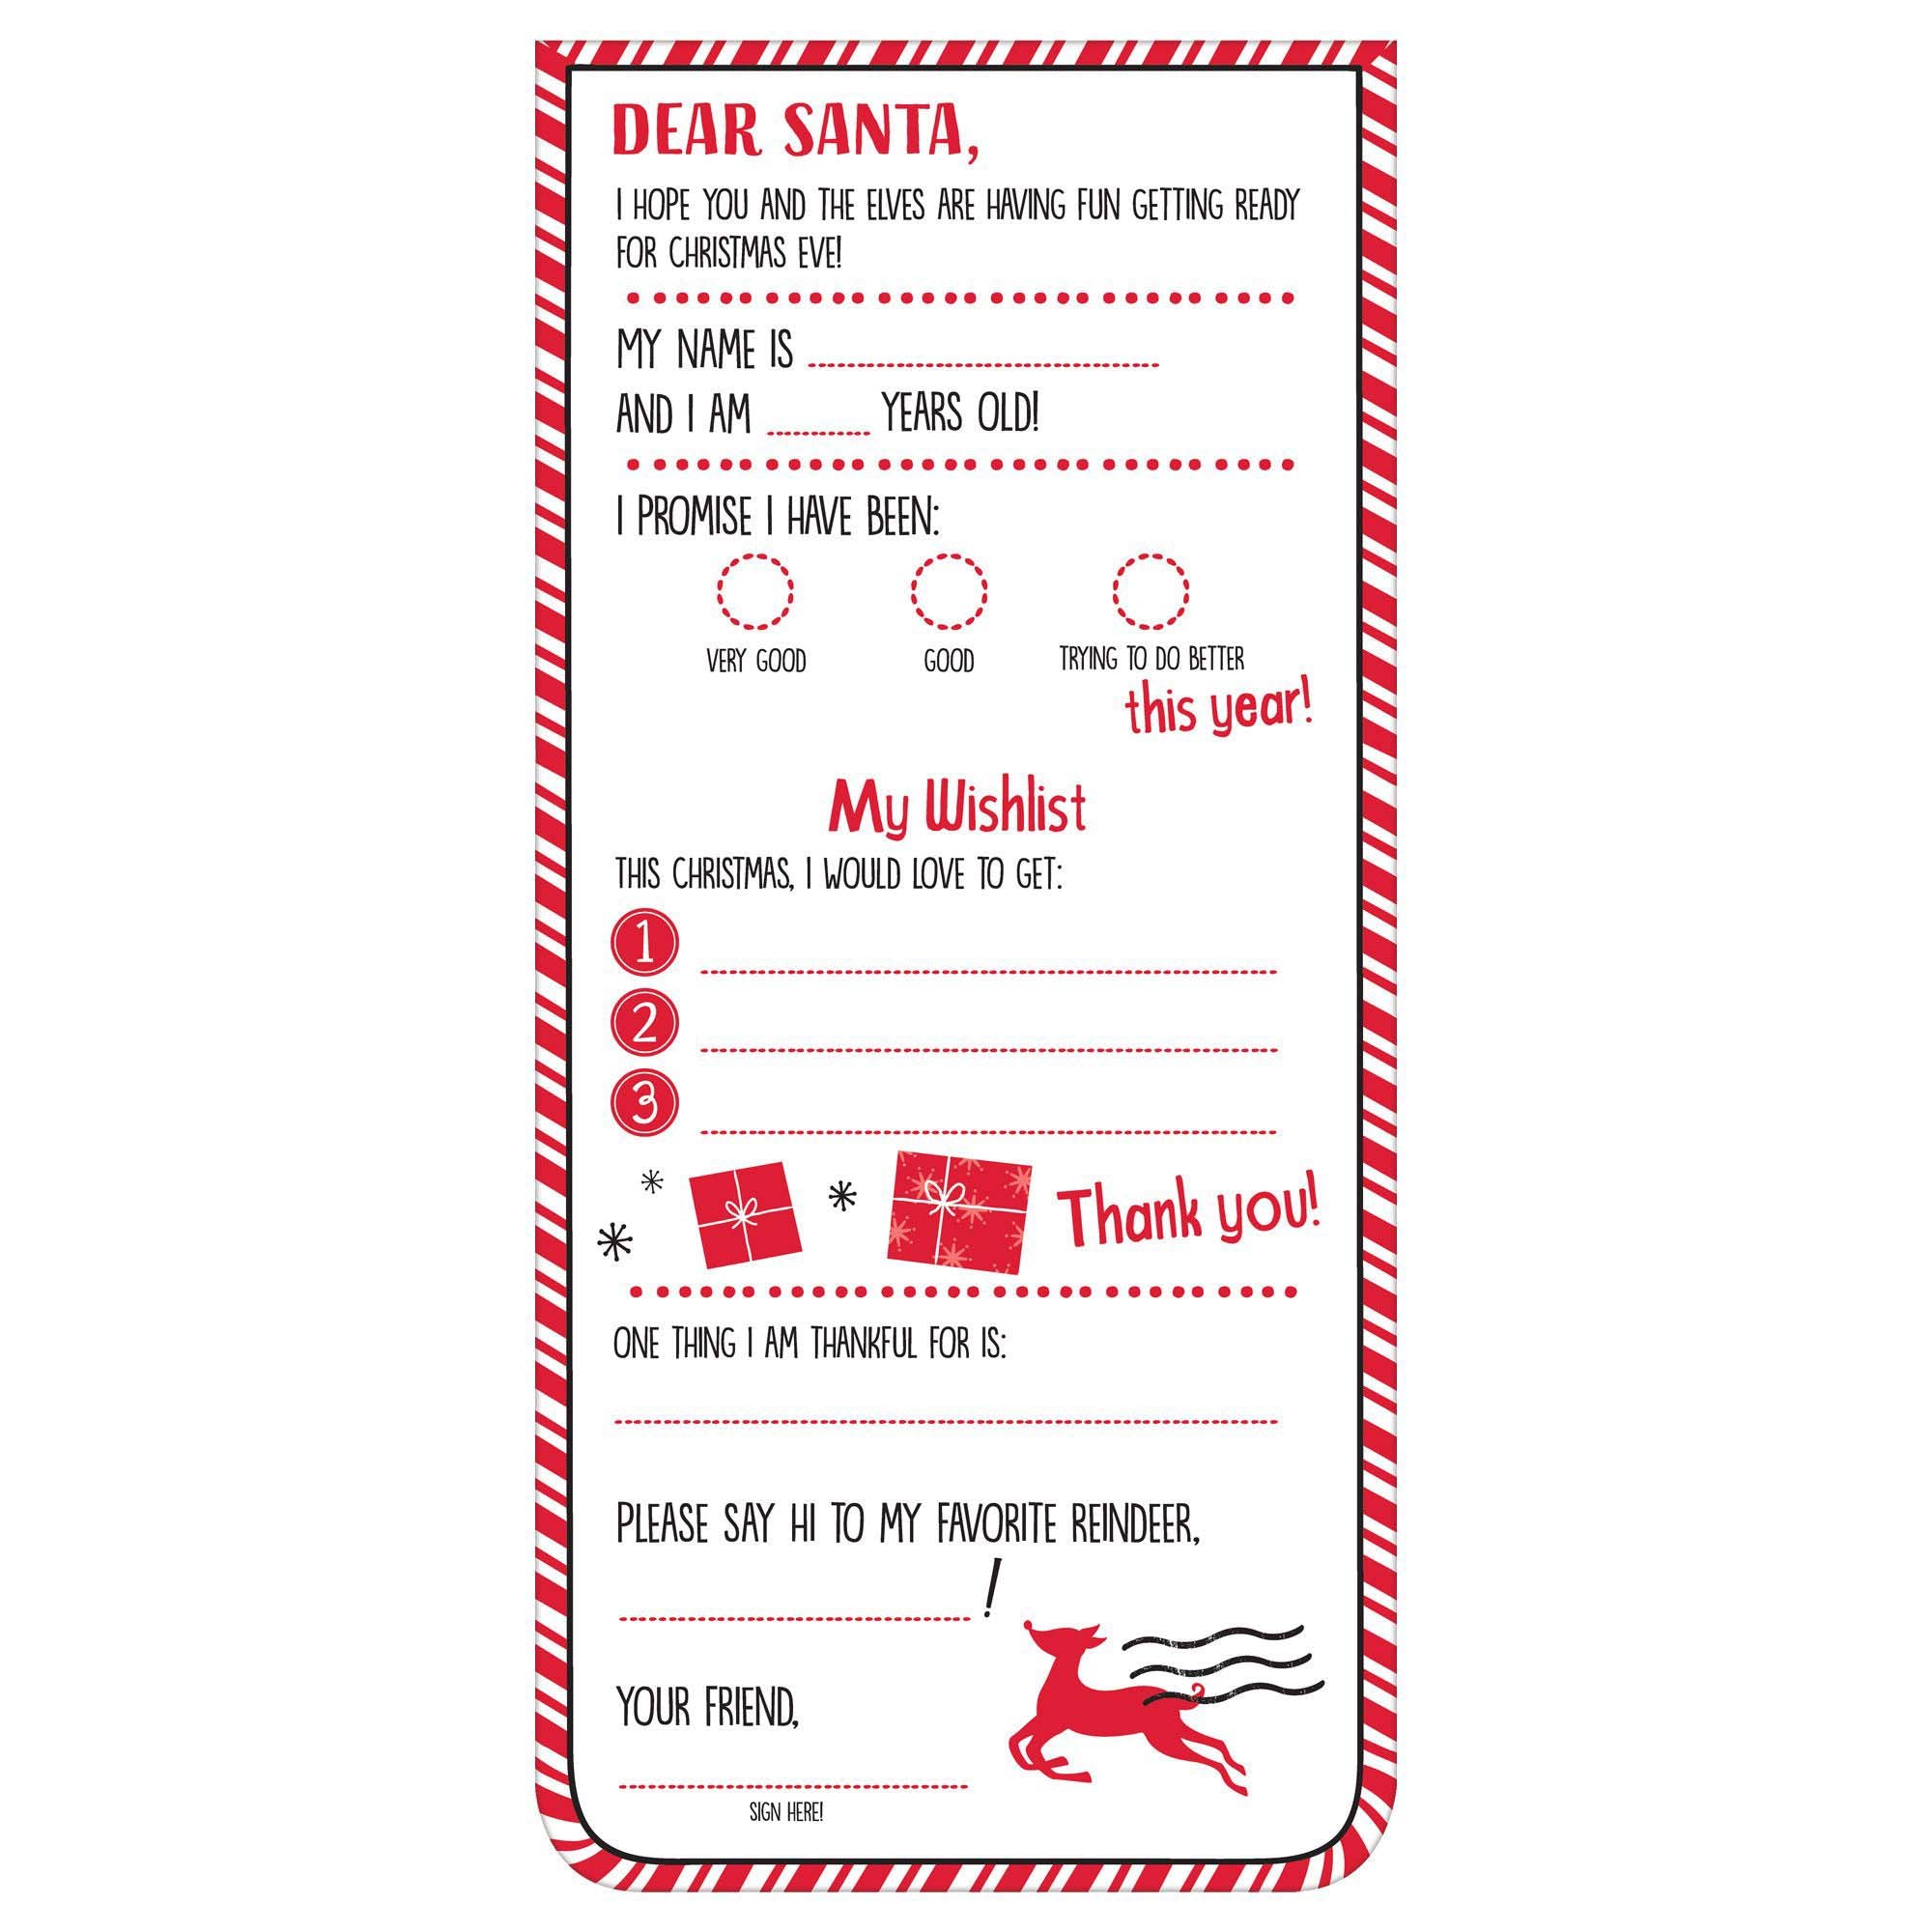 Letters to Santa Kit, 2 Count